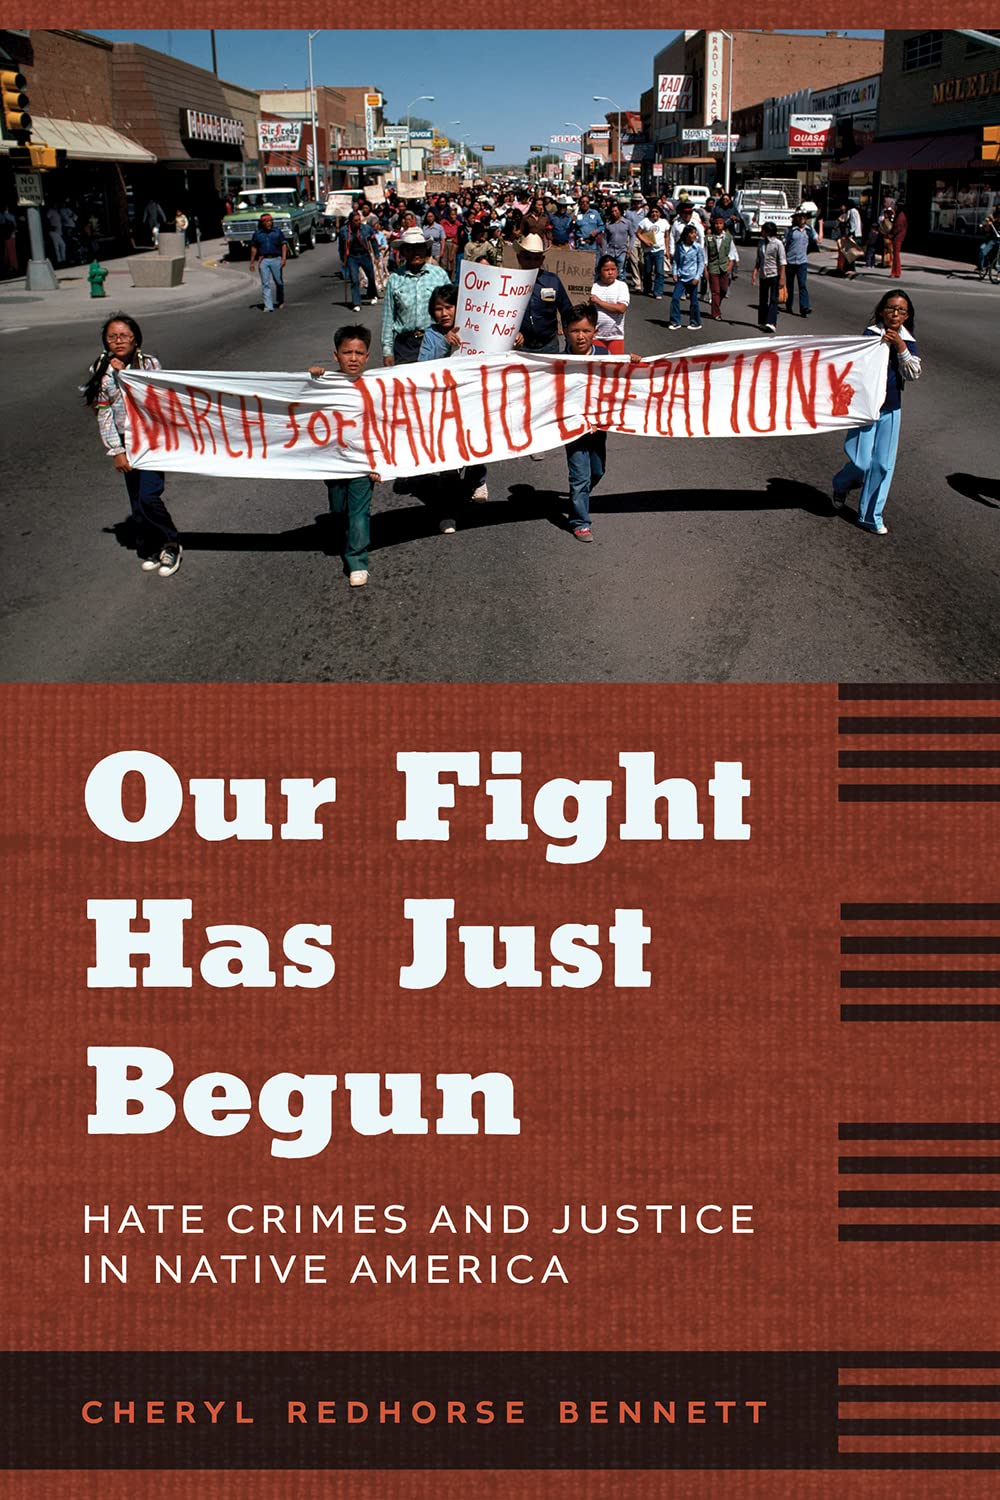 Our Fight Has Just Begun: Hate Crimes and Justice in Native America by Cheryl Redhorse Bennett